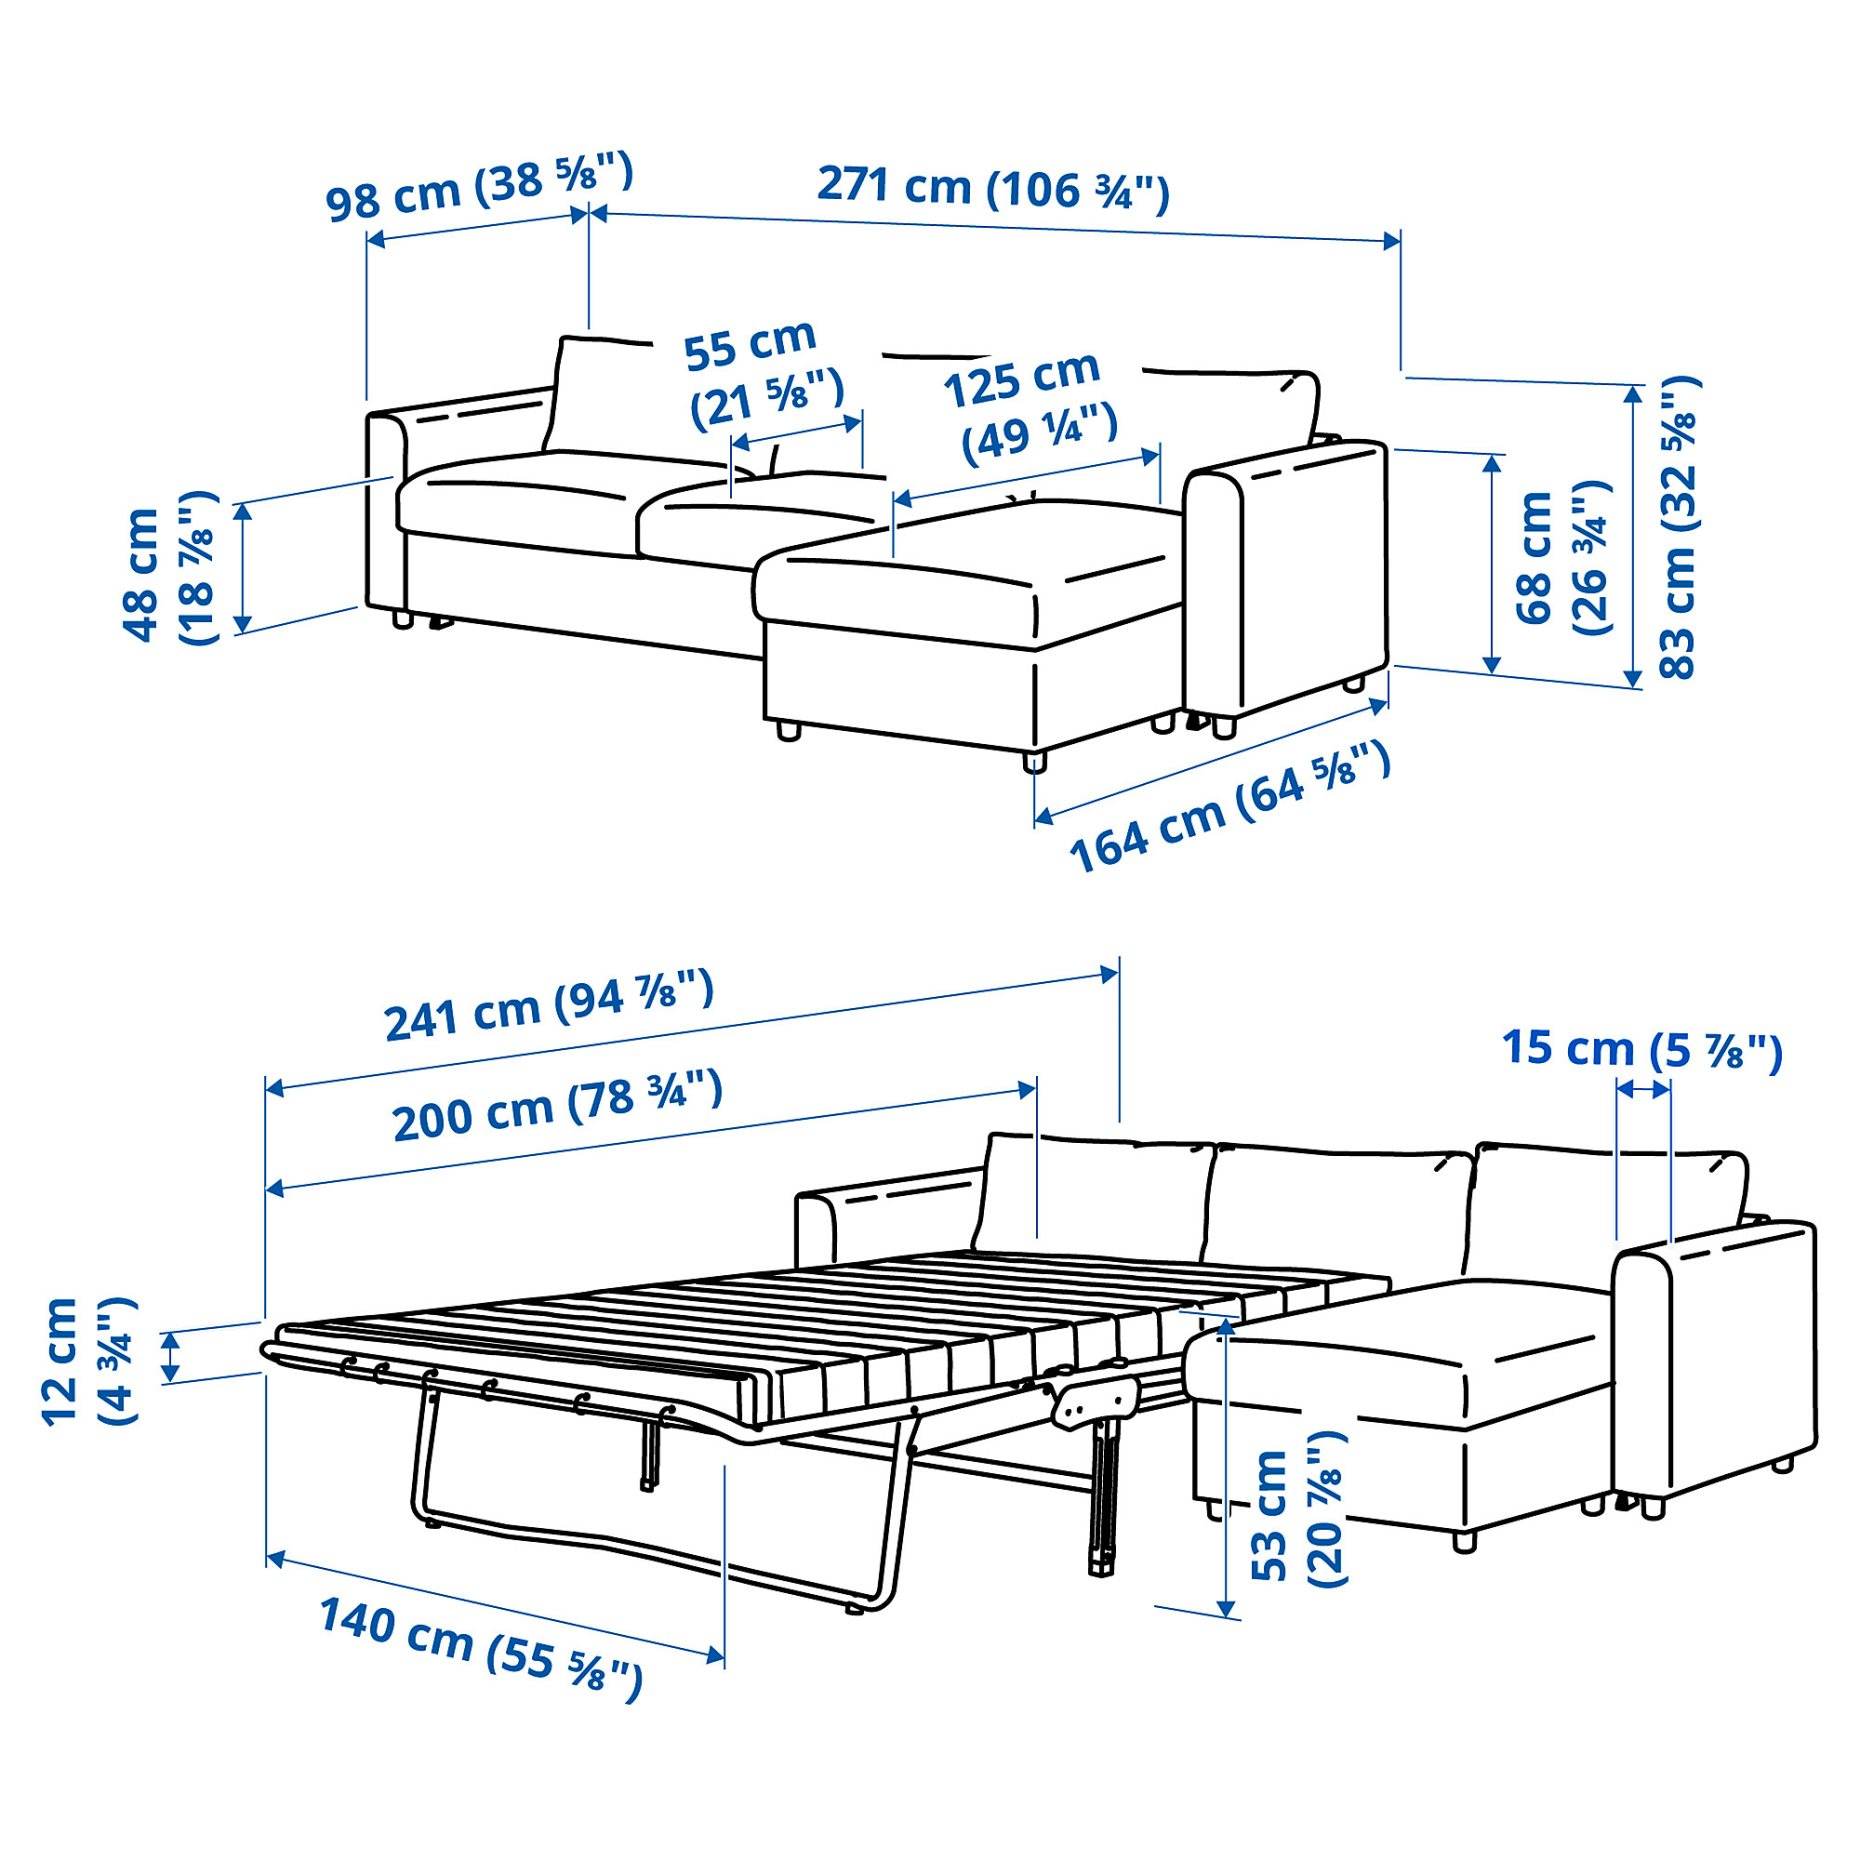 VIMLE, 3-seat sofa-bed with chaise longue, 995.372.19